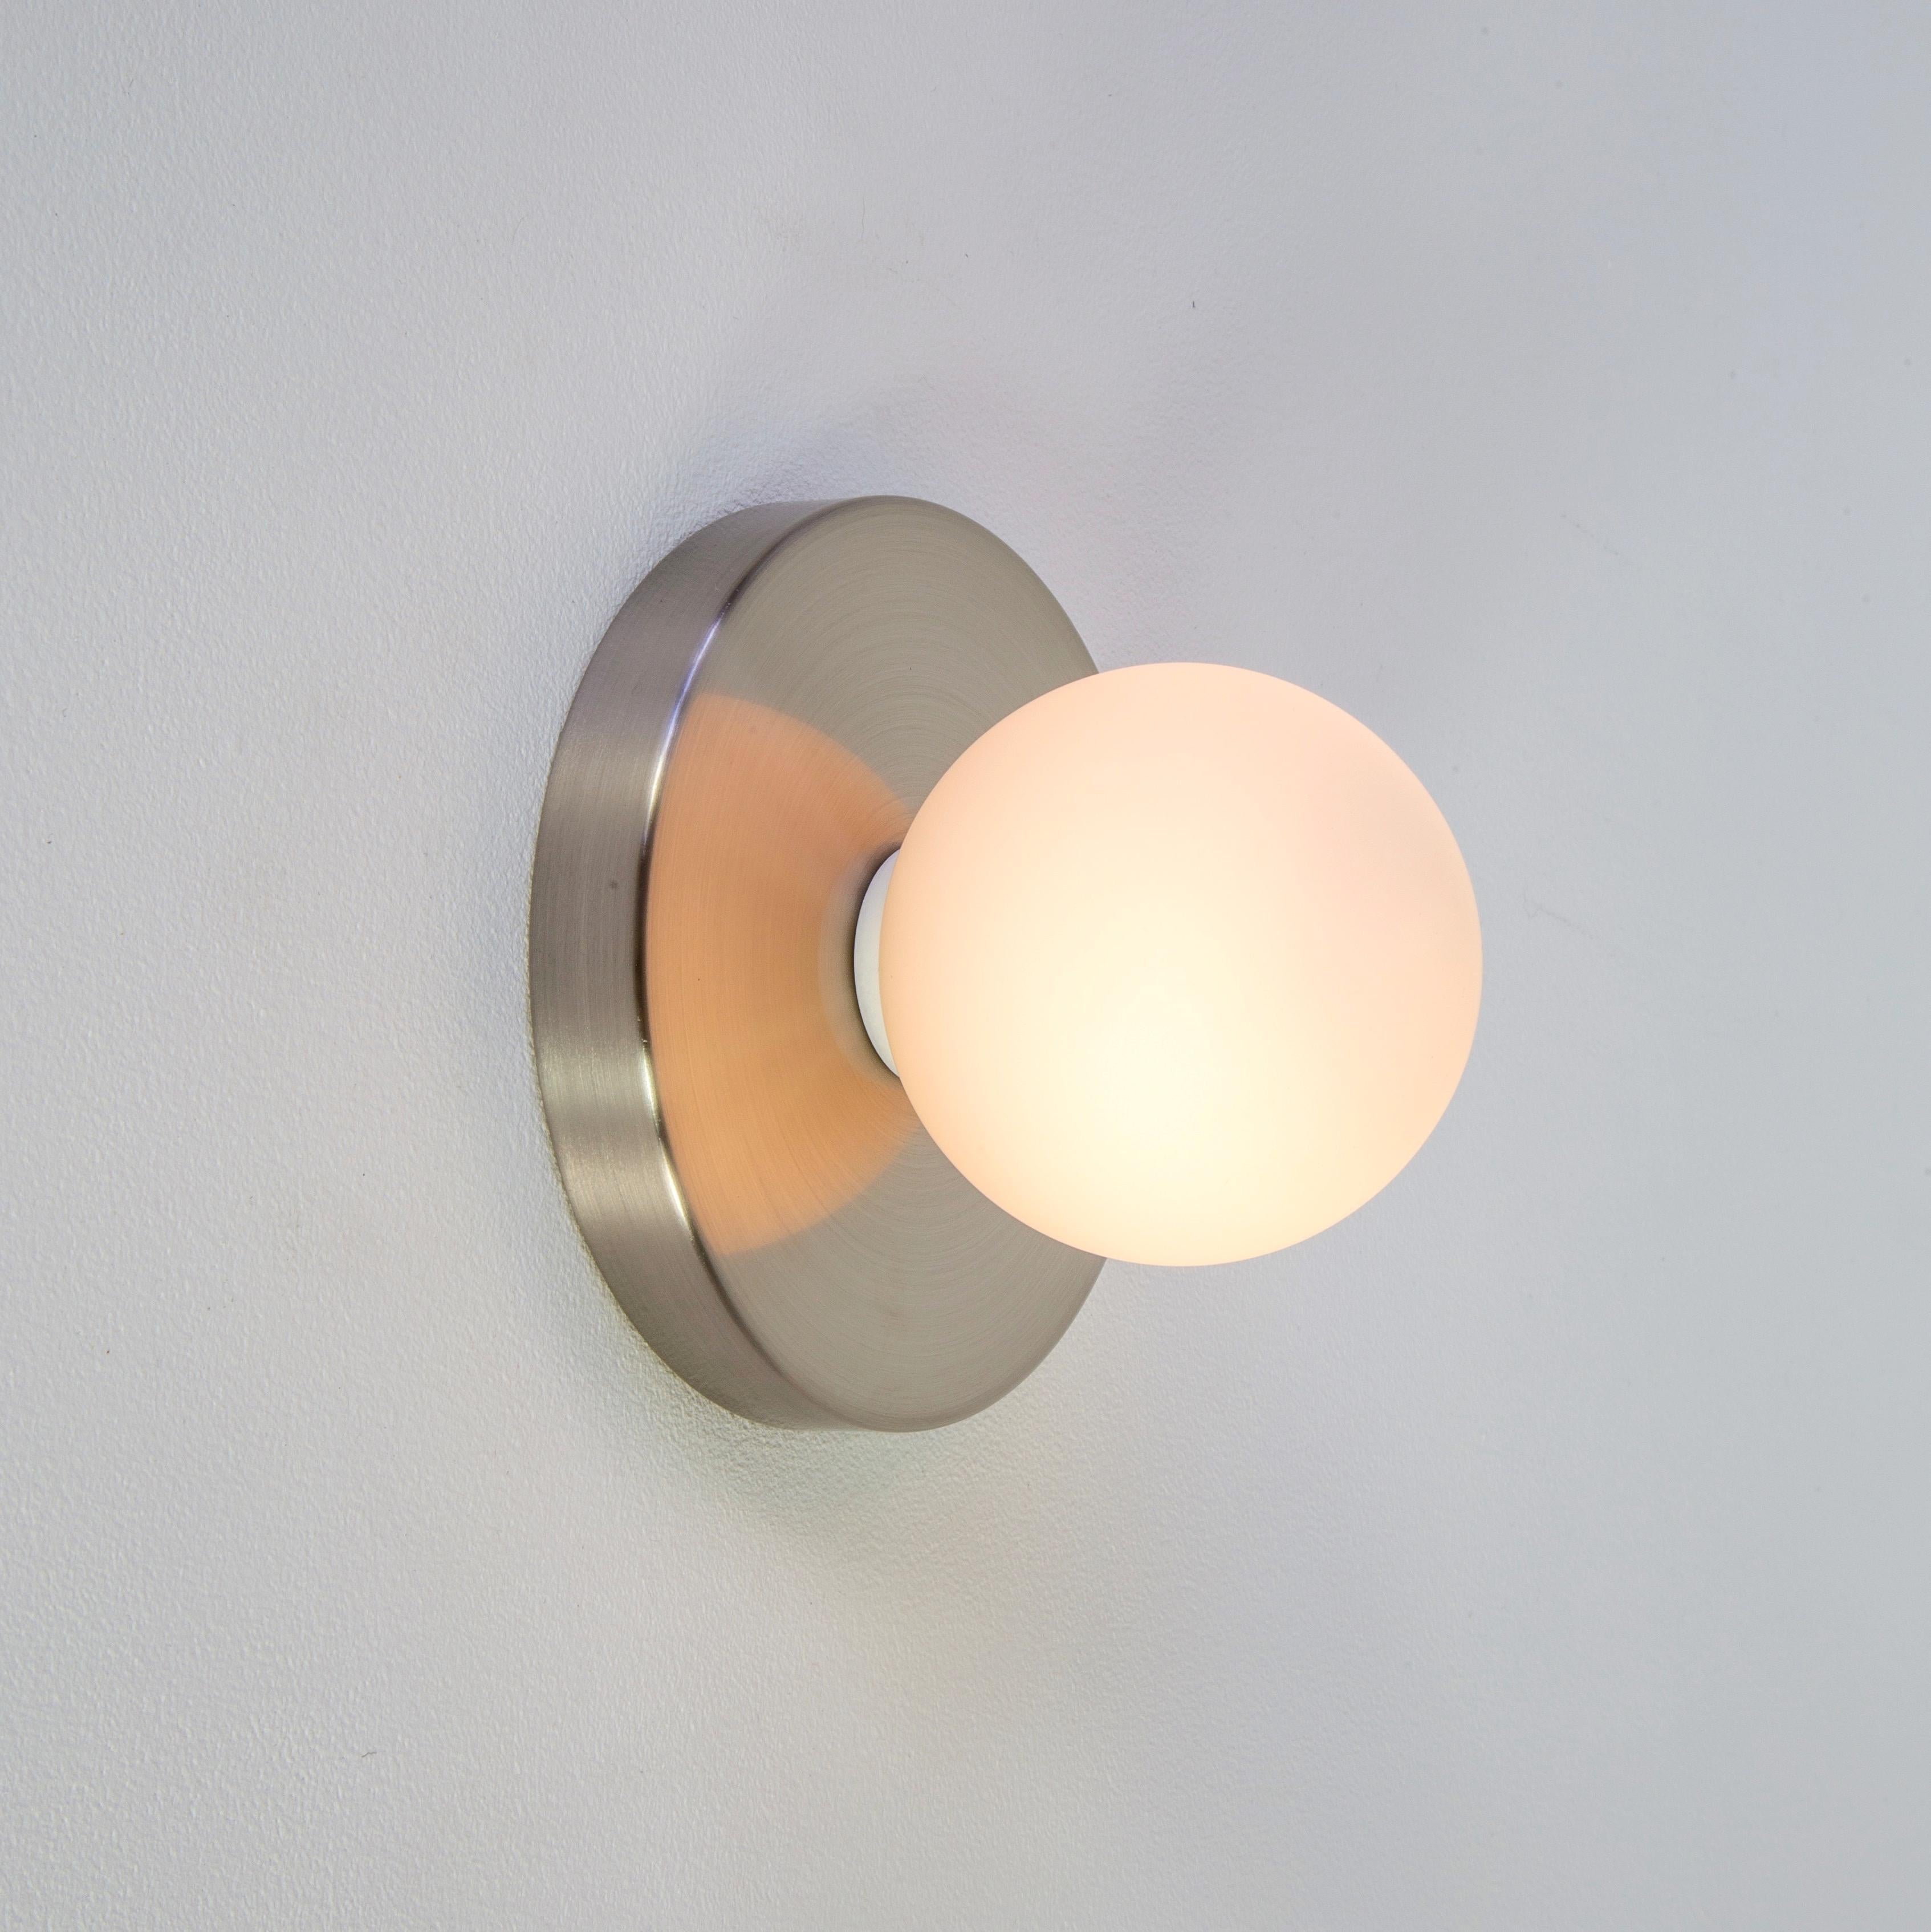 American Globe Sconce by Research.Lighting, Brushed Nickel, Made to Order For Sale